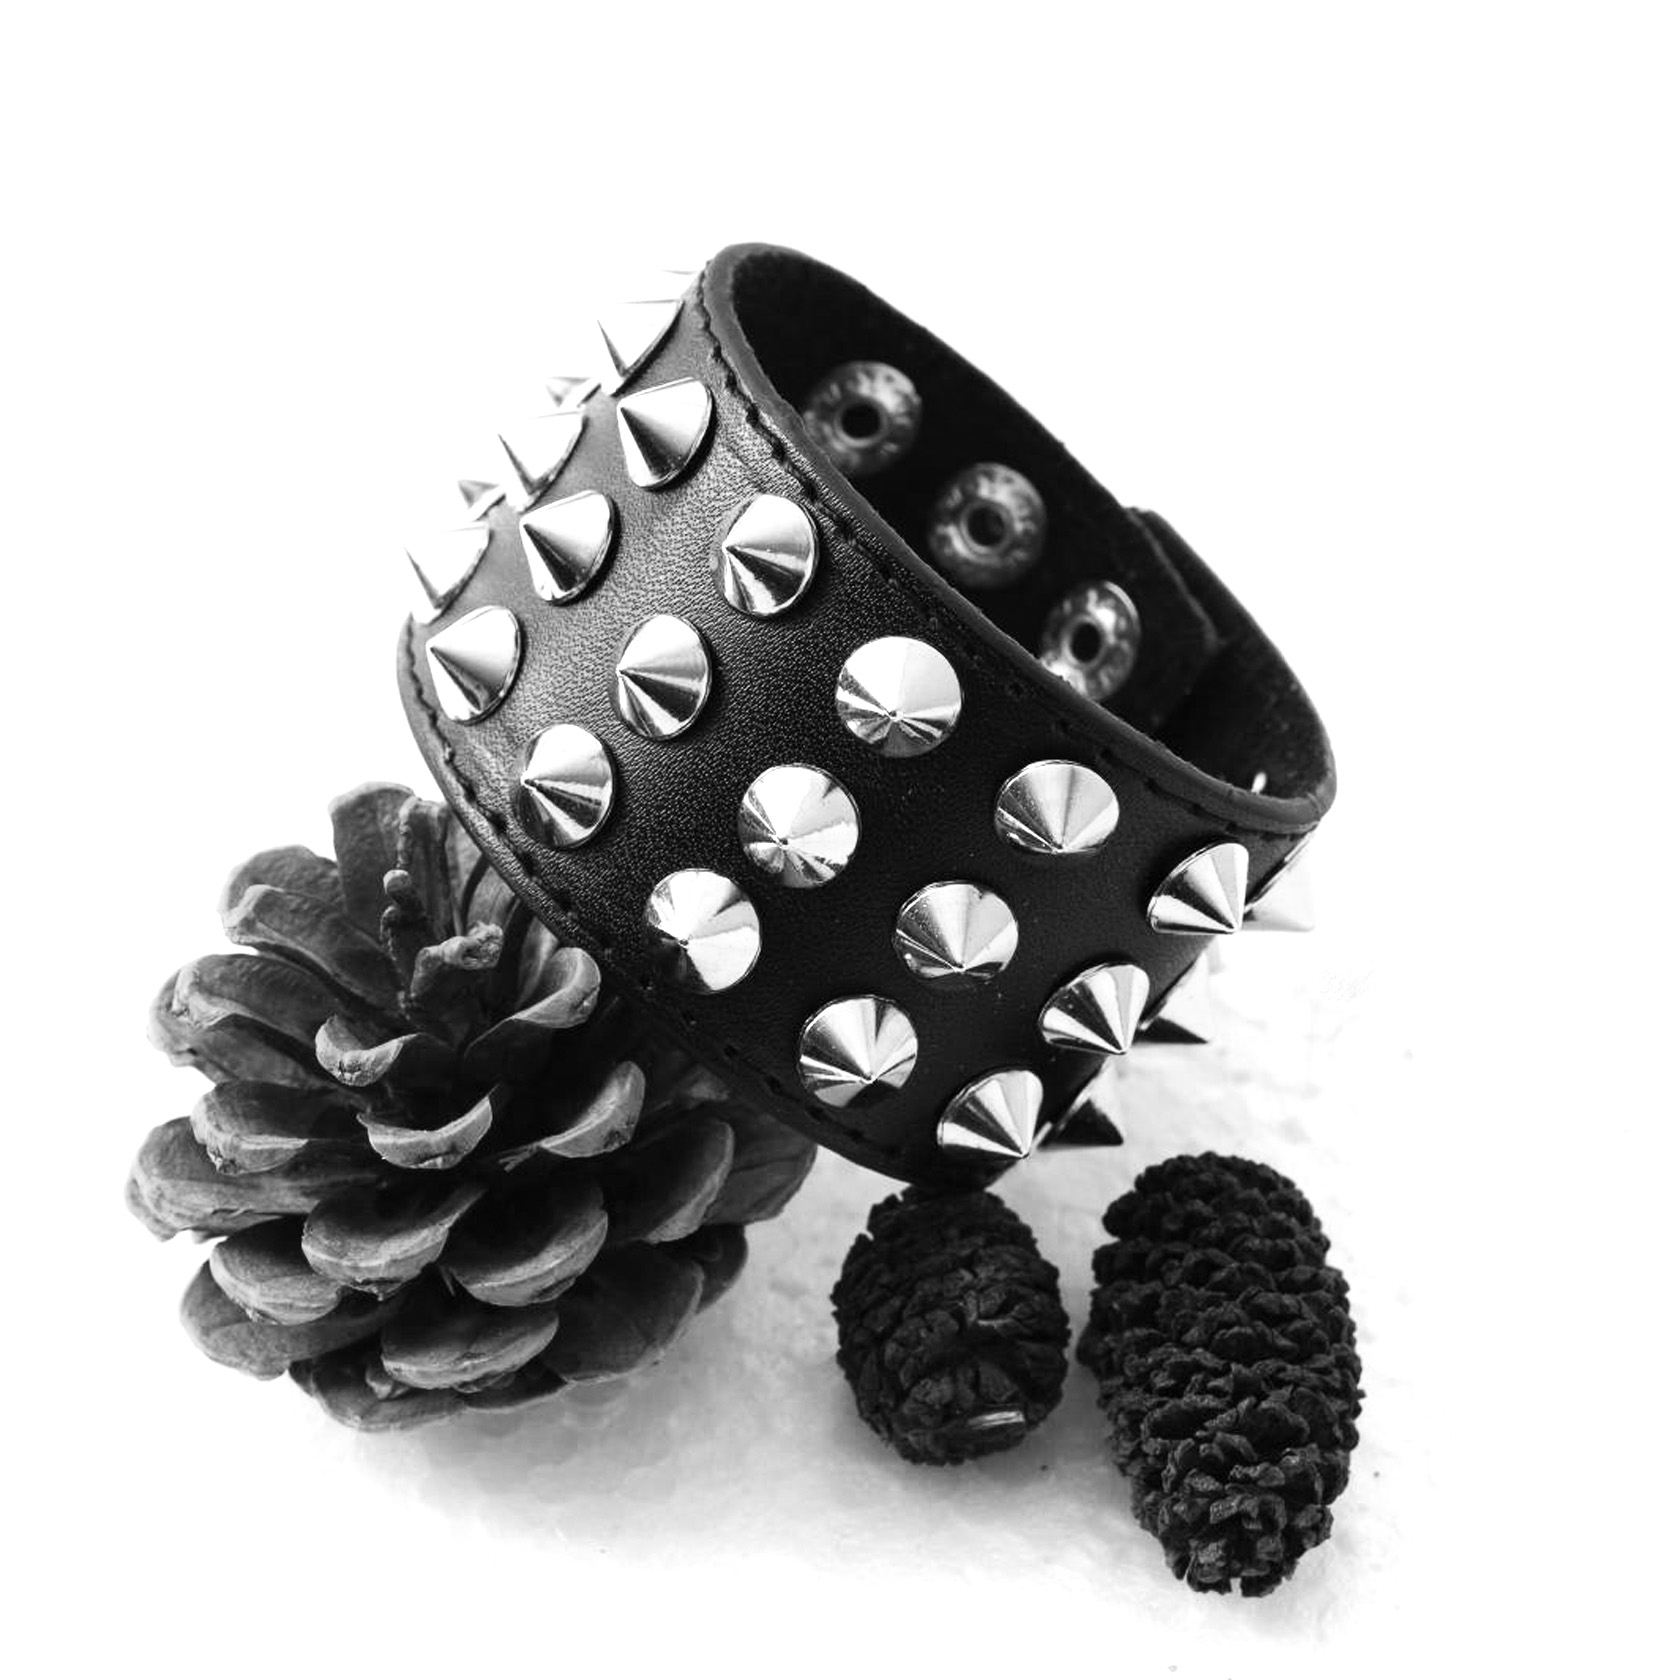 Vintage wide cuff bracelet faux leather punk style spiked rivets buckle wristband